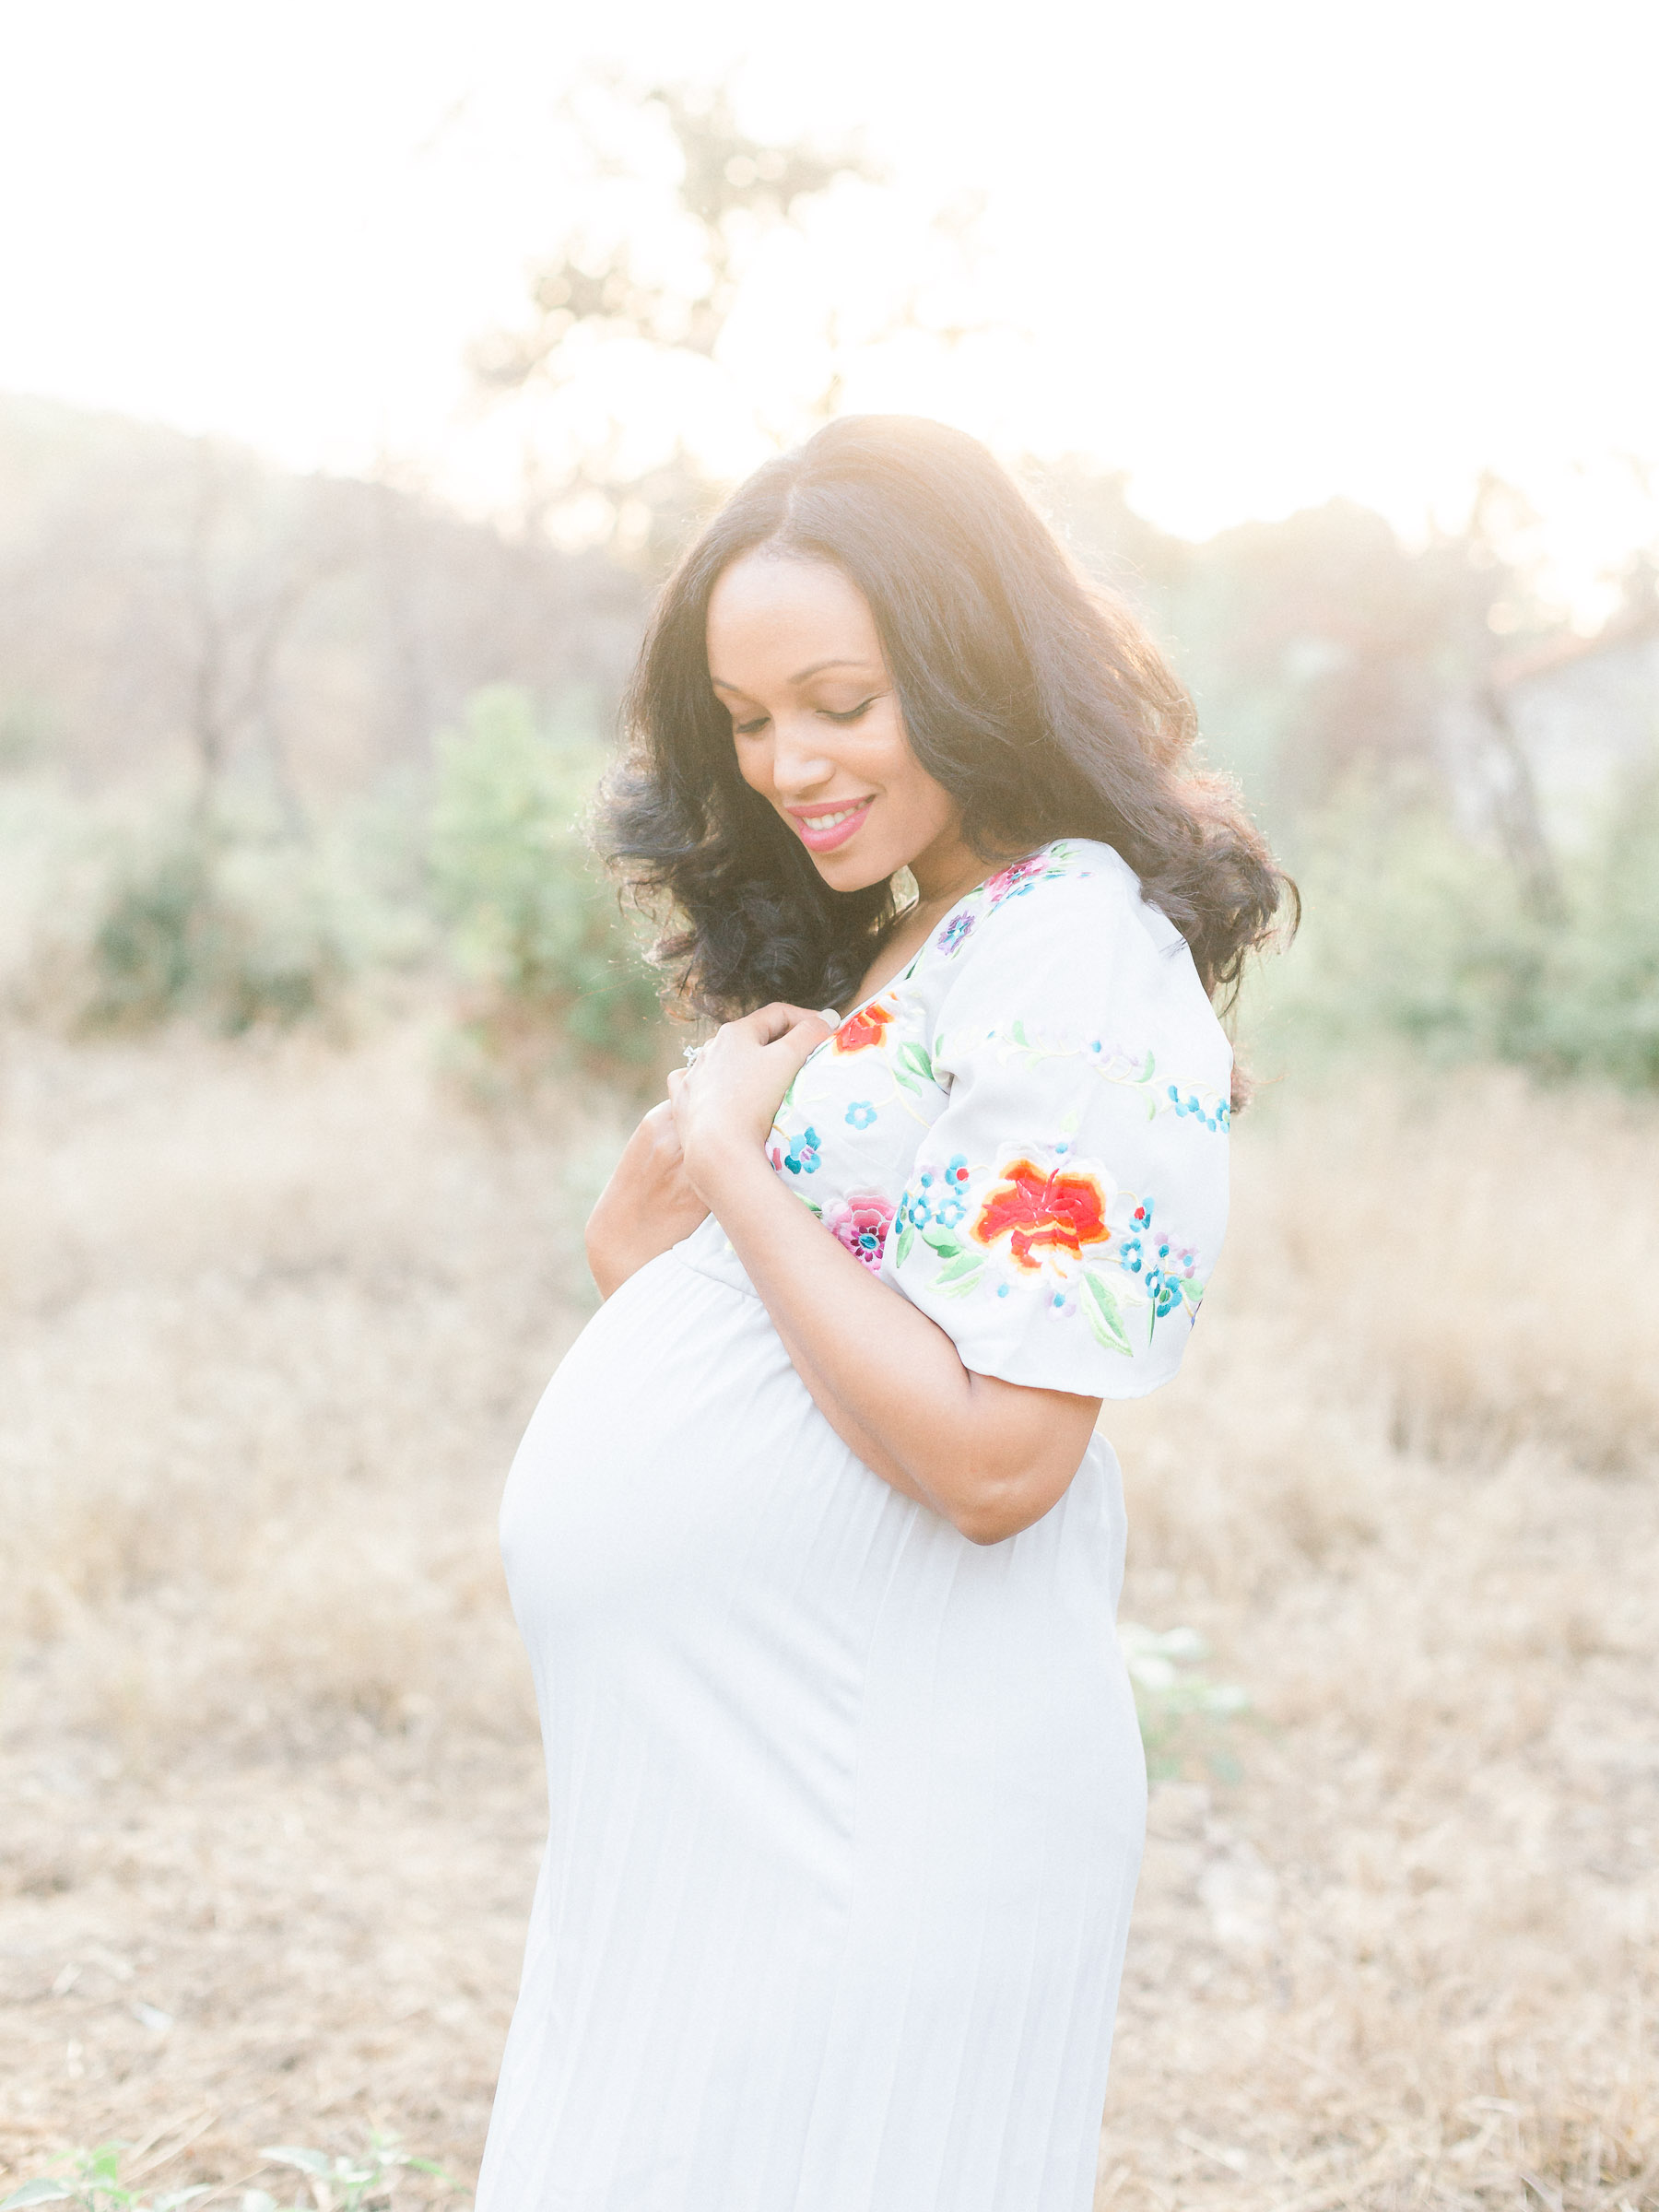 Pregnant lady with hands at her heart smiling down at baby